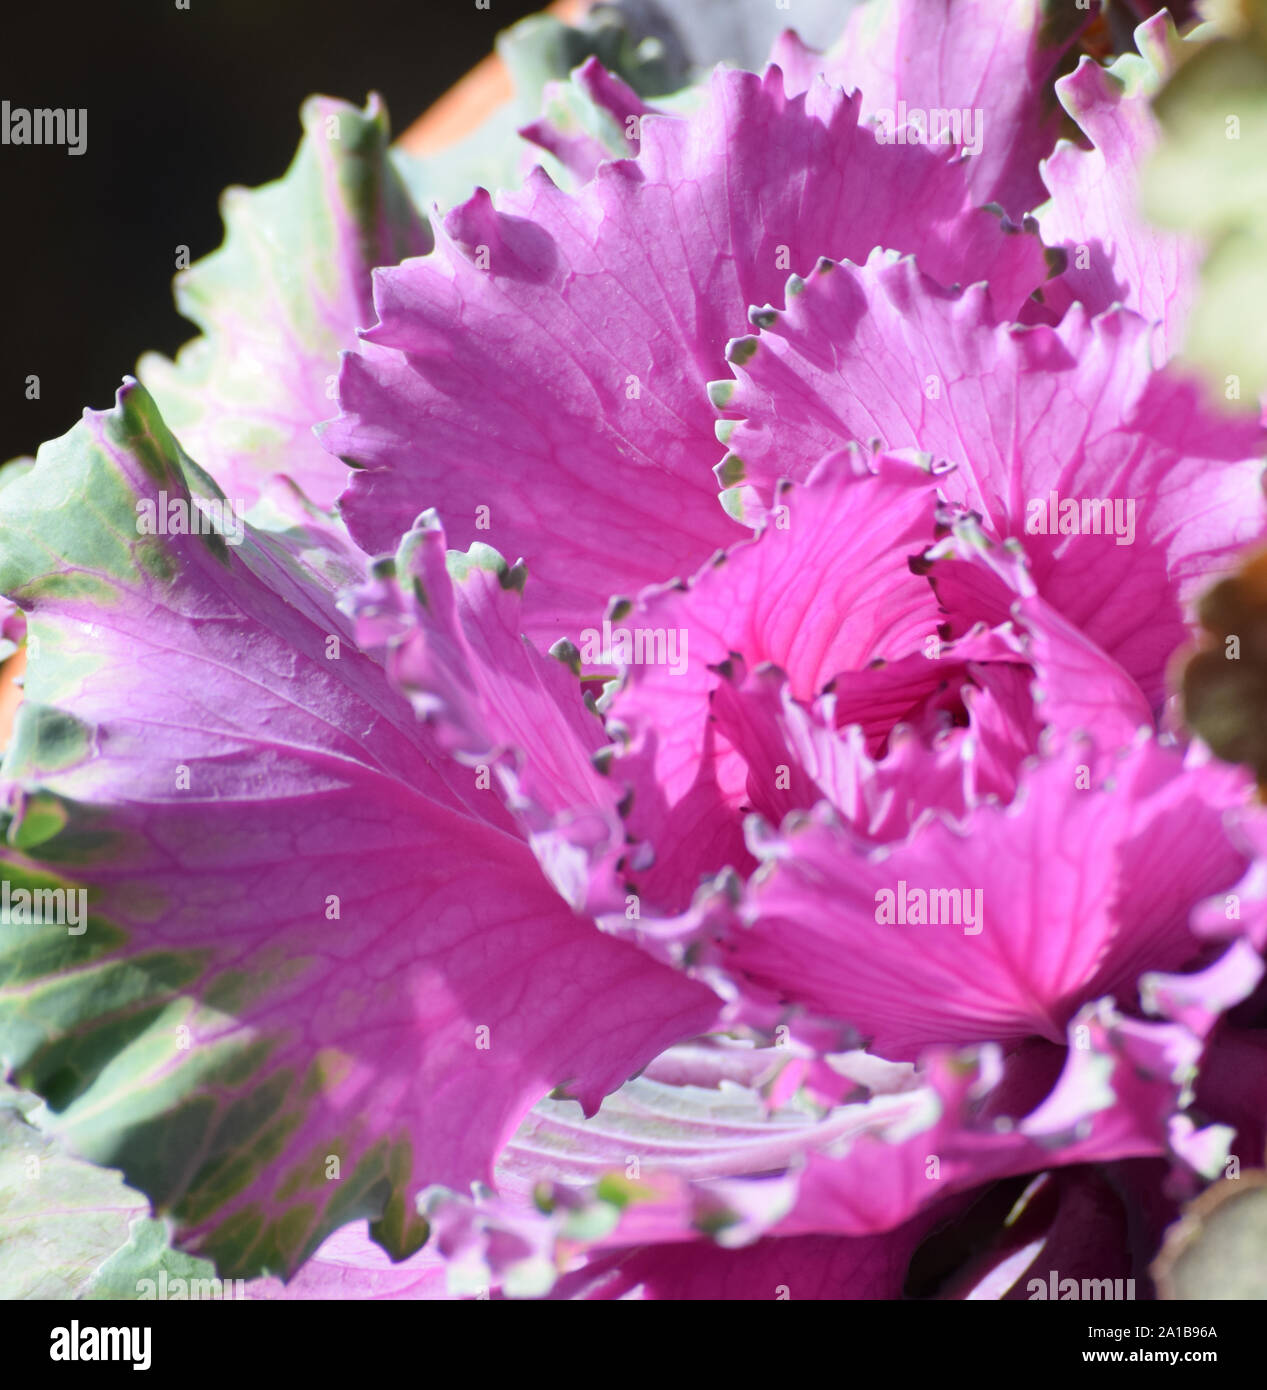 Colourfulness of the Ornamental cabbage Stock Photo